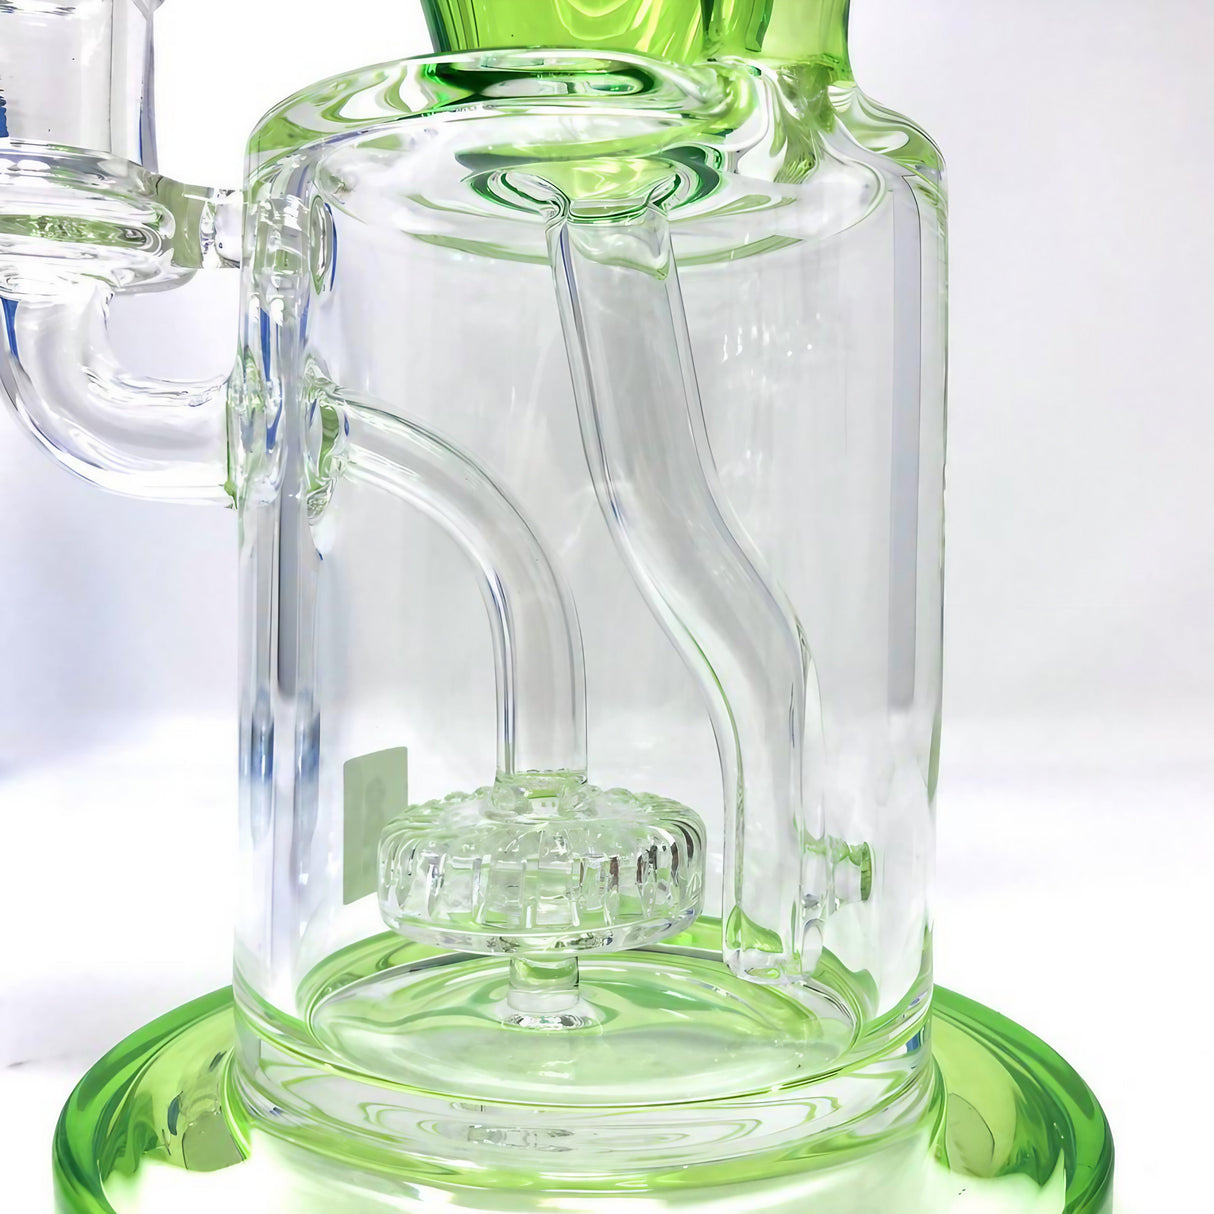 AFM - The Drain Recycler Dab Rig - 10.5" with In-Line Percolator, Close-Up Side View